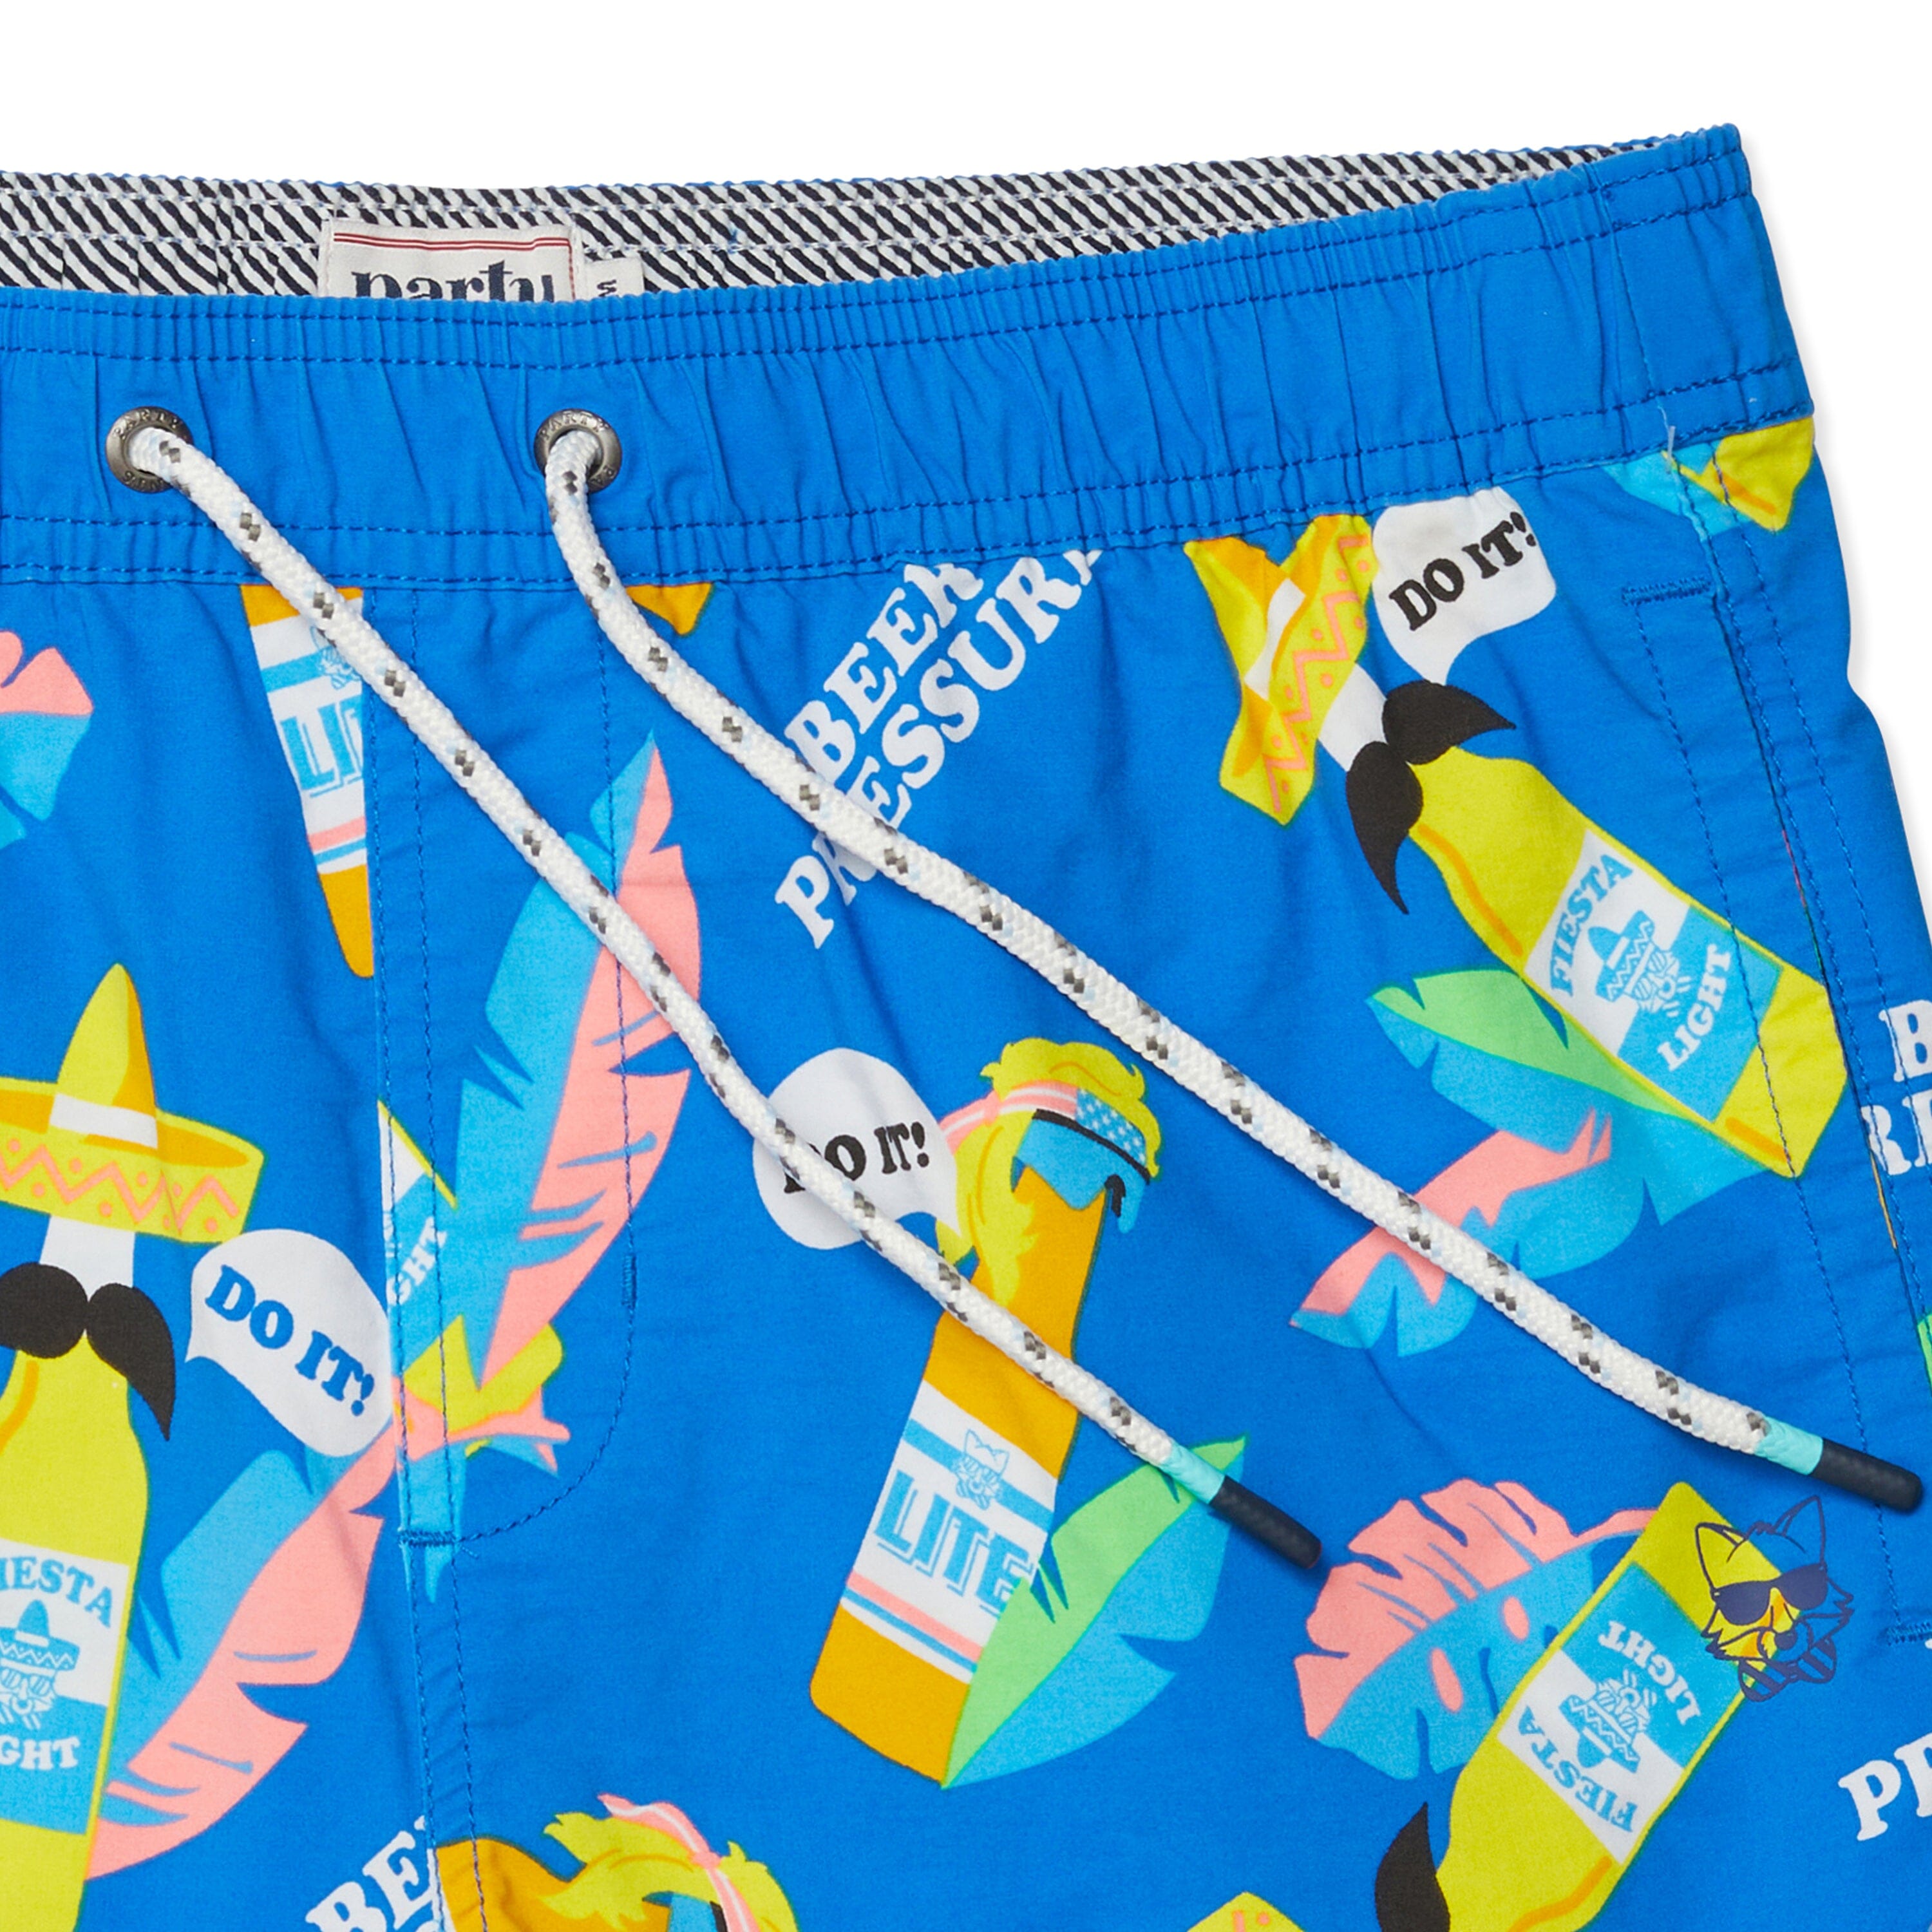 BEER PRESSURE PARTY STARTER SHORT - BLUE PRINTED SHORTS PARTY PANTS 